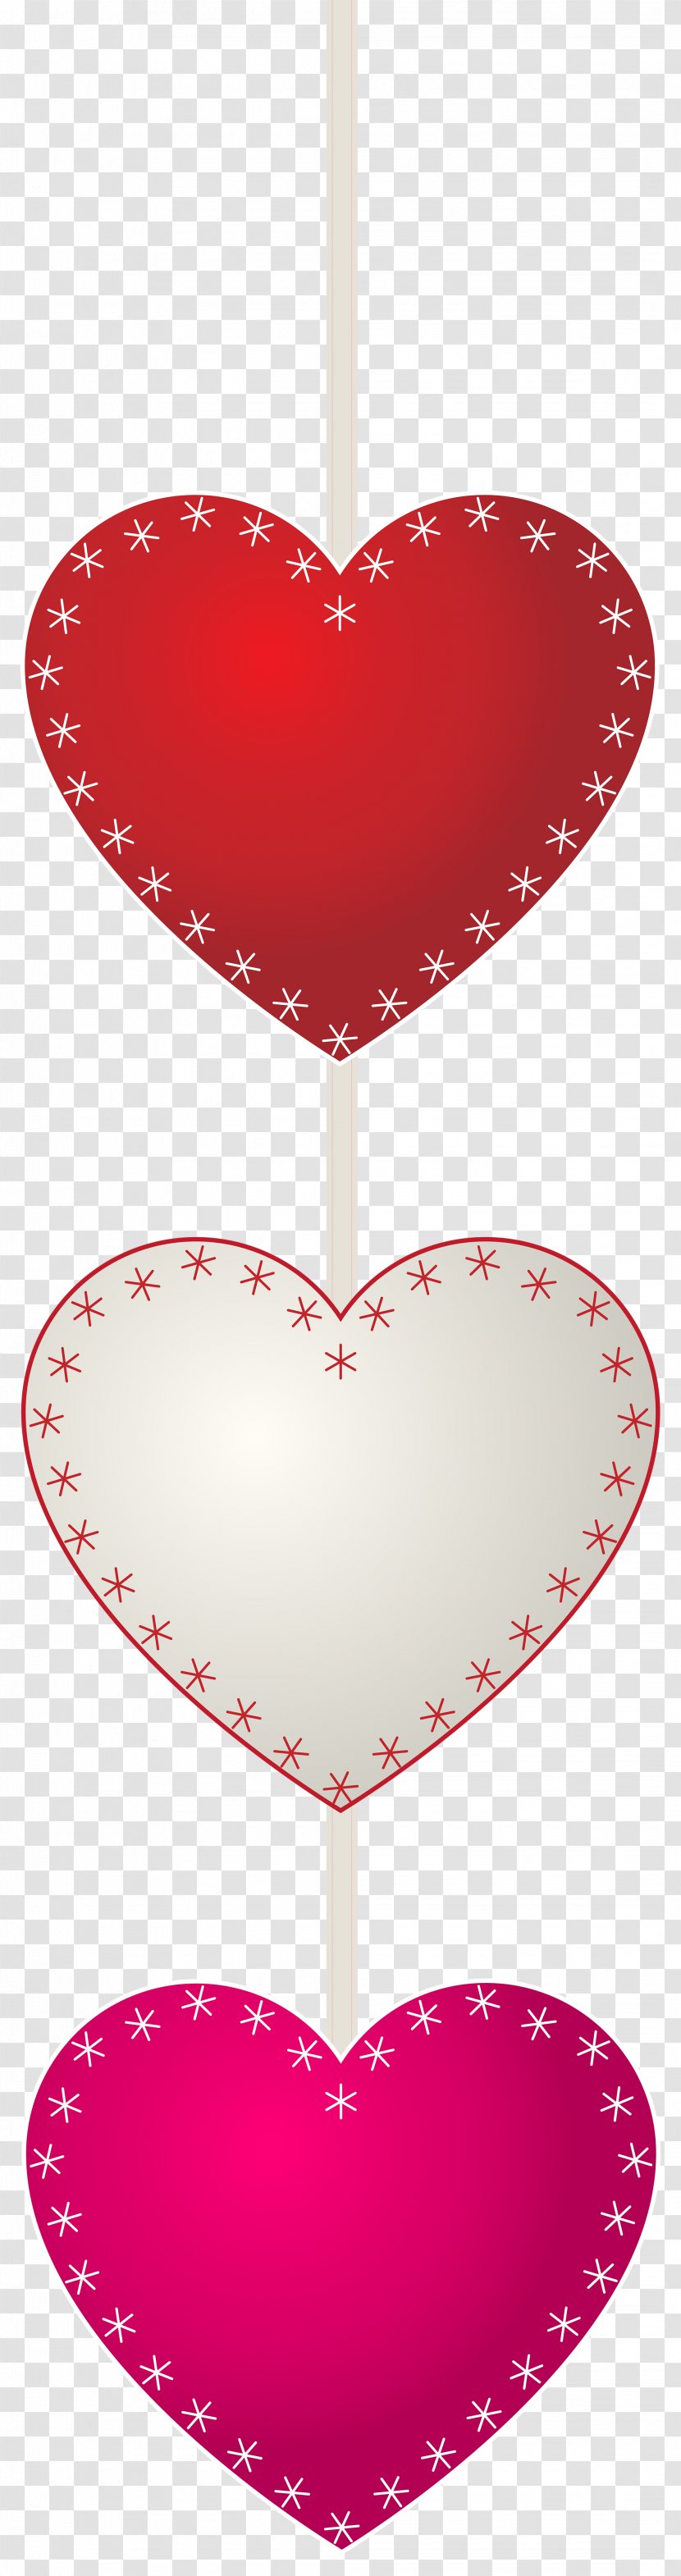 Heart Red Font Pattern - Tree - Deco Hearts Clip Art Image Transparent PNG